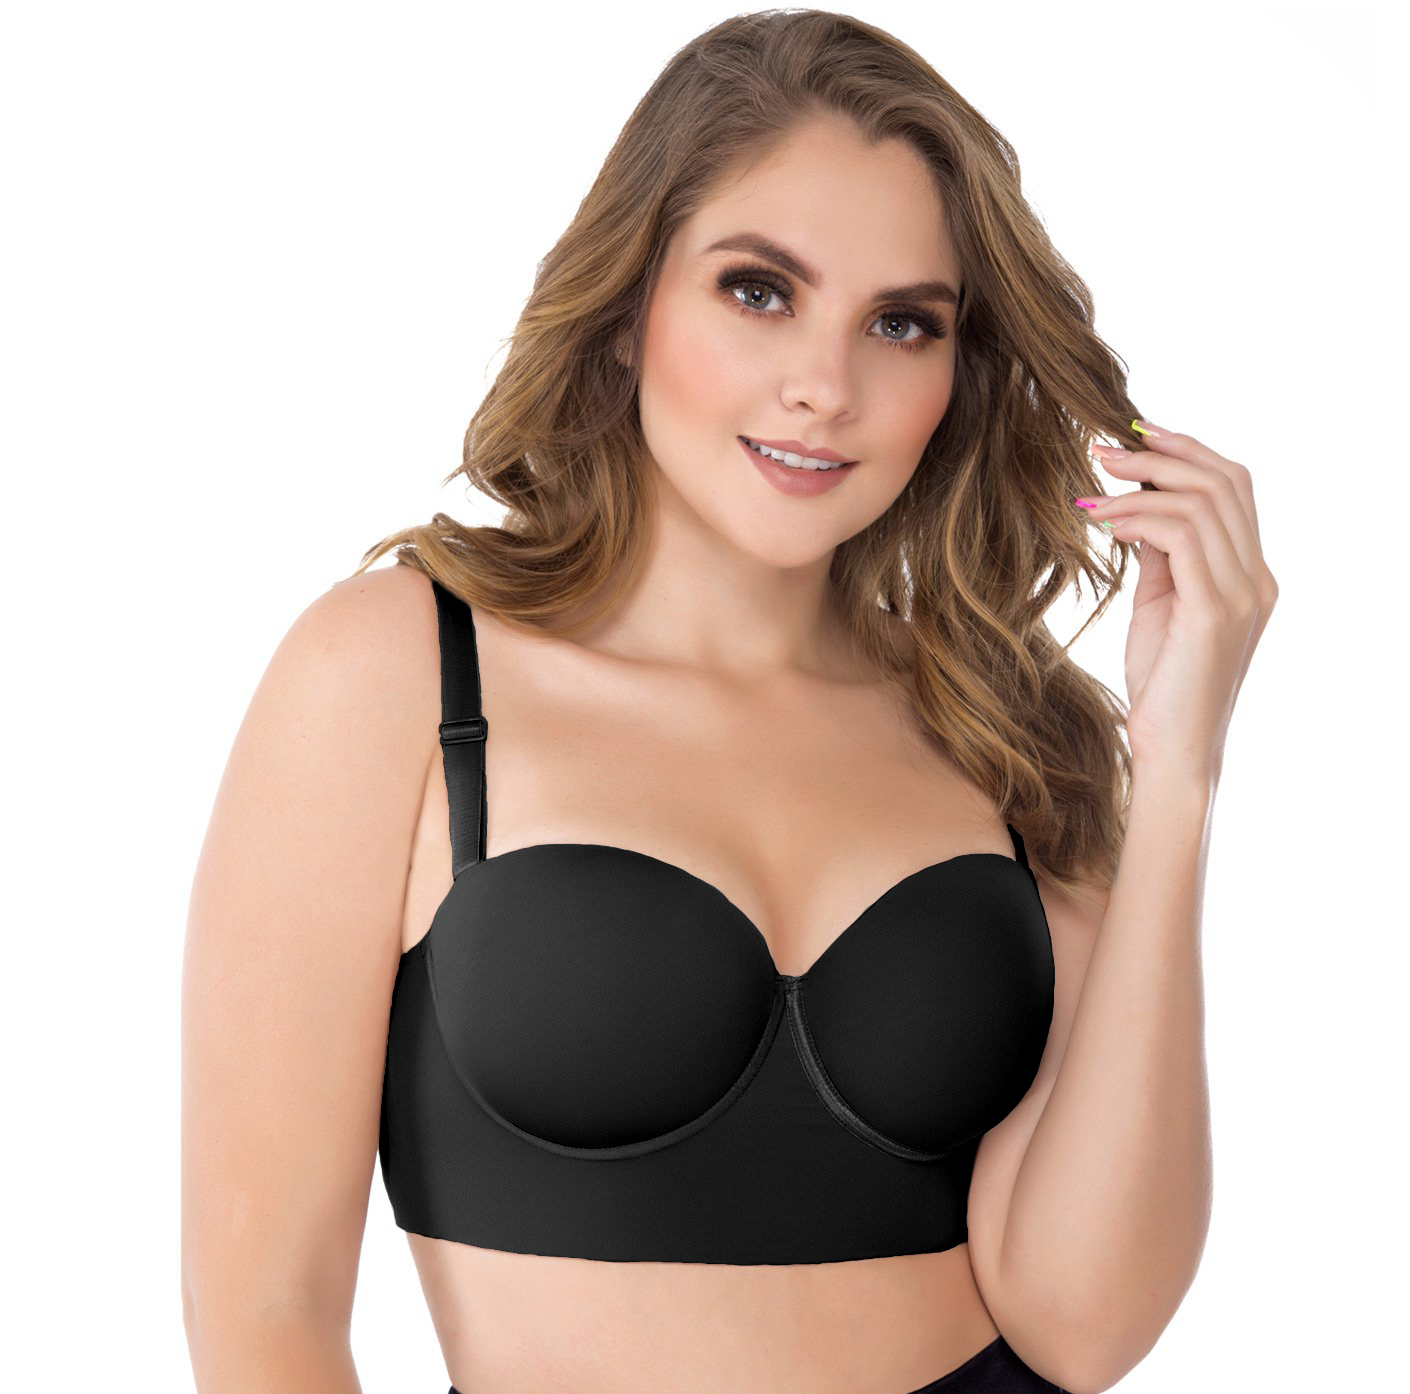 Uplady 8034 Firm Control Strapless Bra for Women